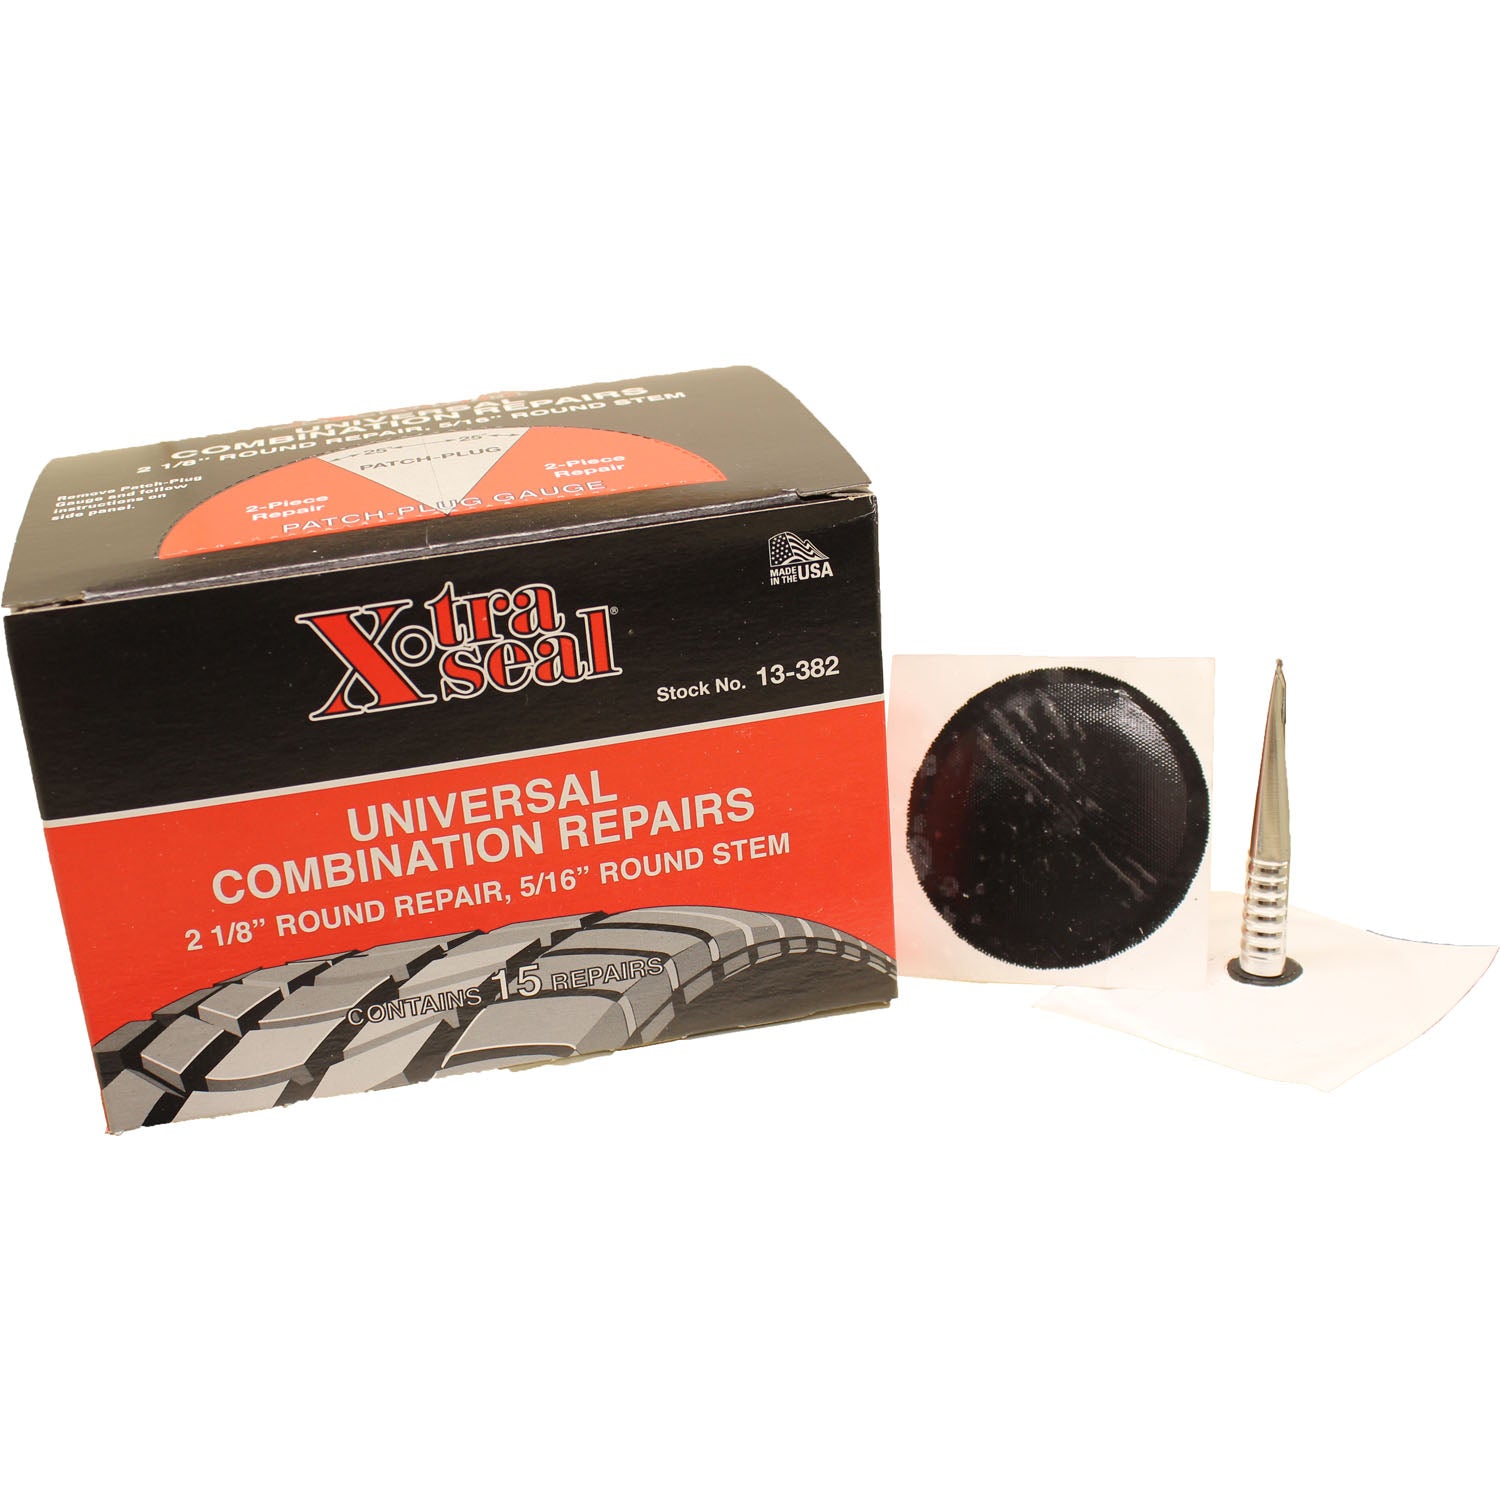 Xtra Seal 13-382 Universal 2-1/4" Round Tire Repair Plug Patch Box of 15